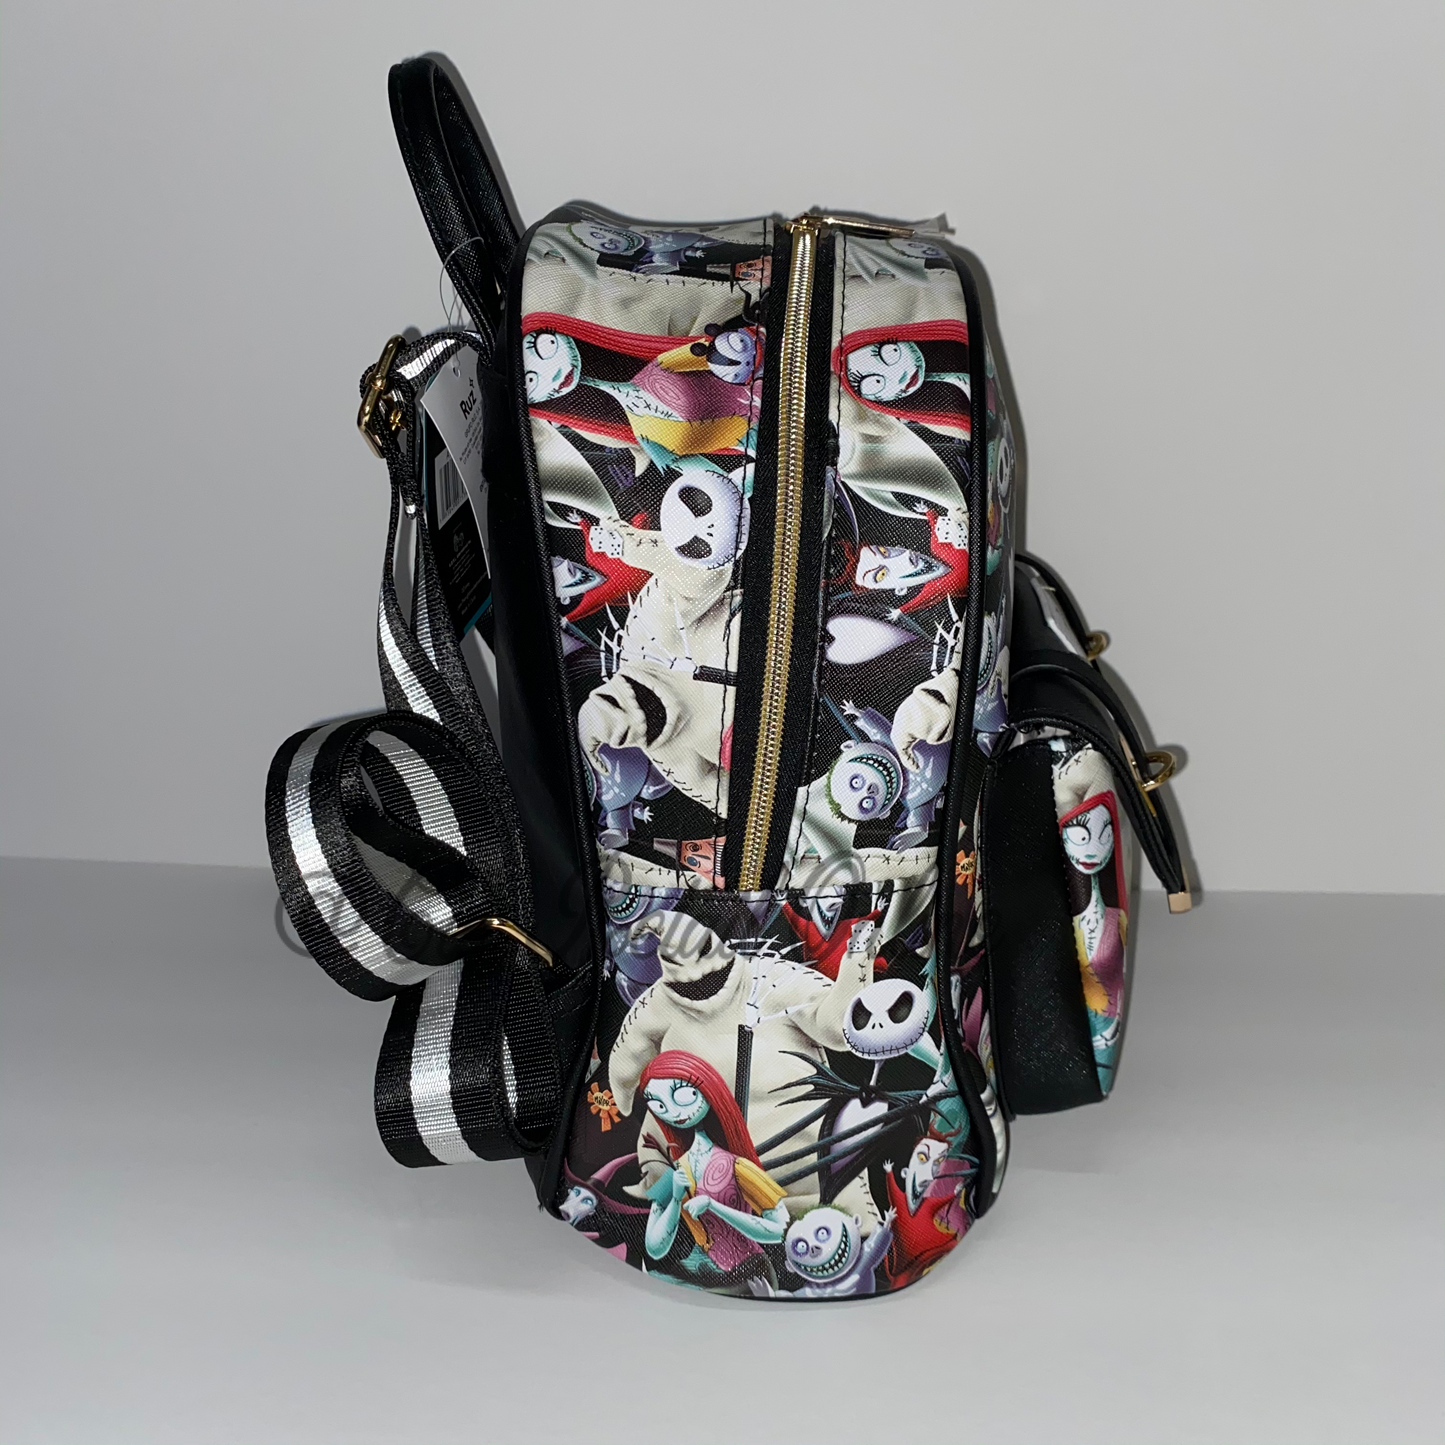 Nightmare before Christmas all over print backpack